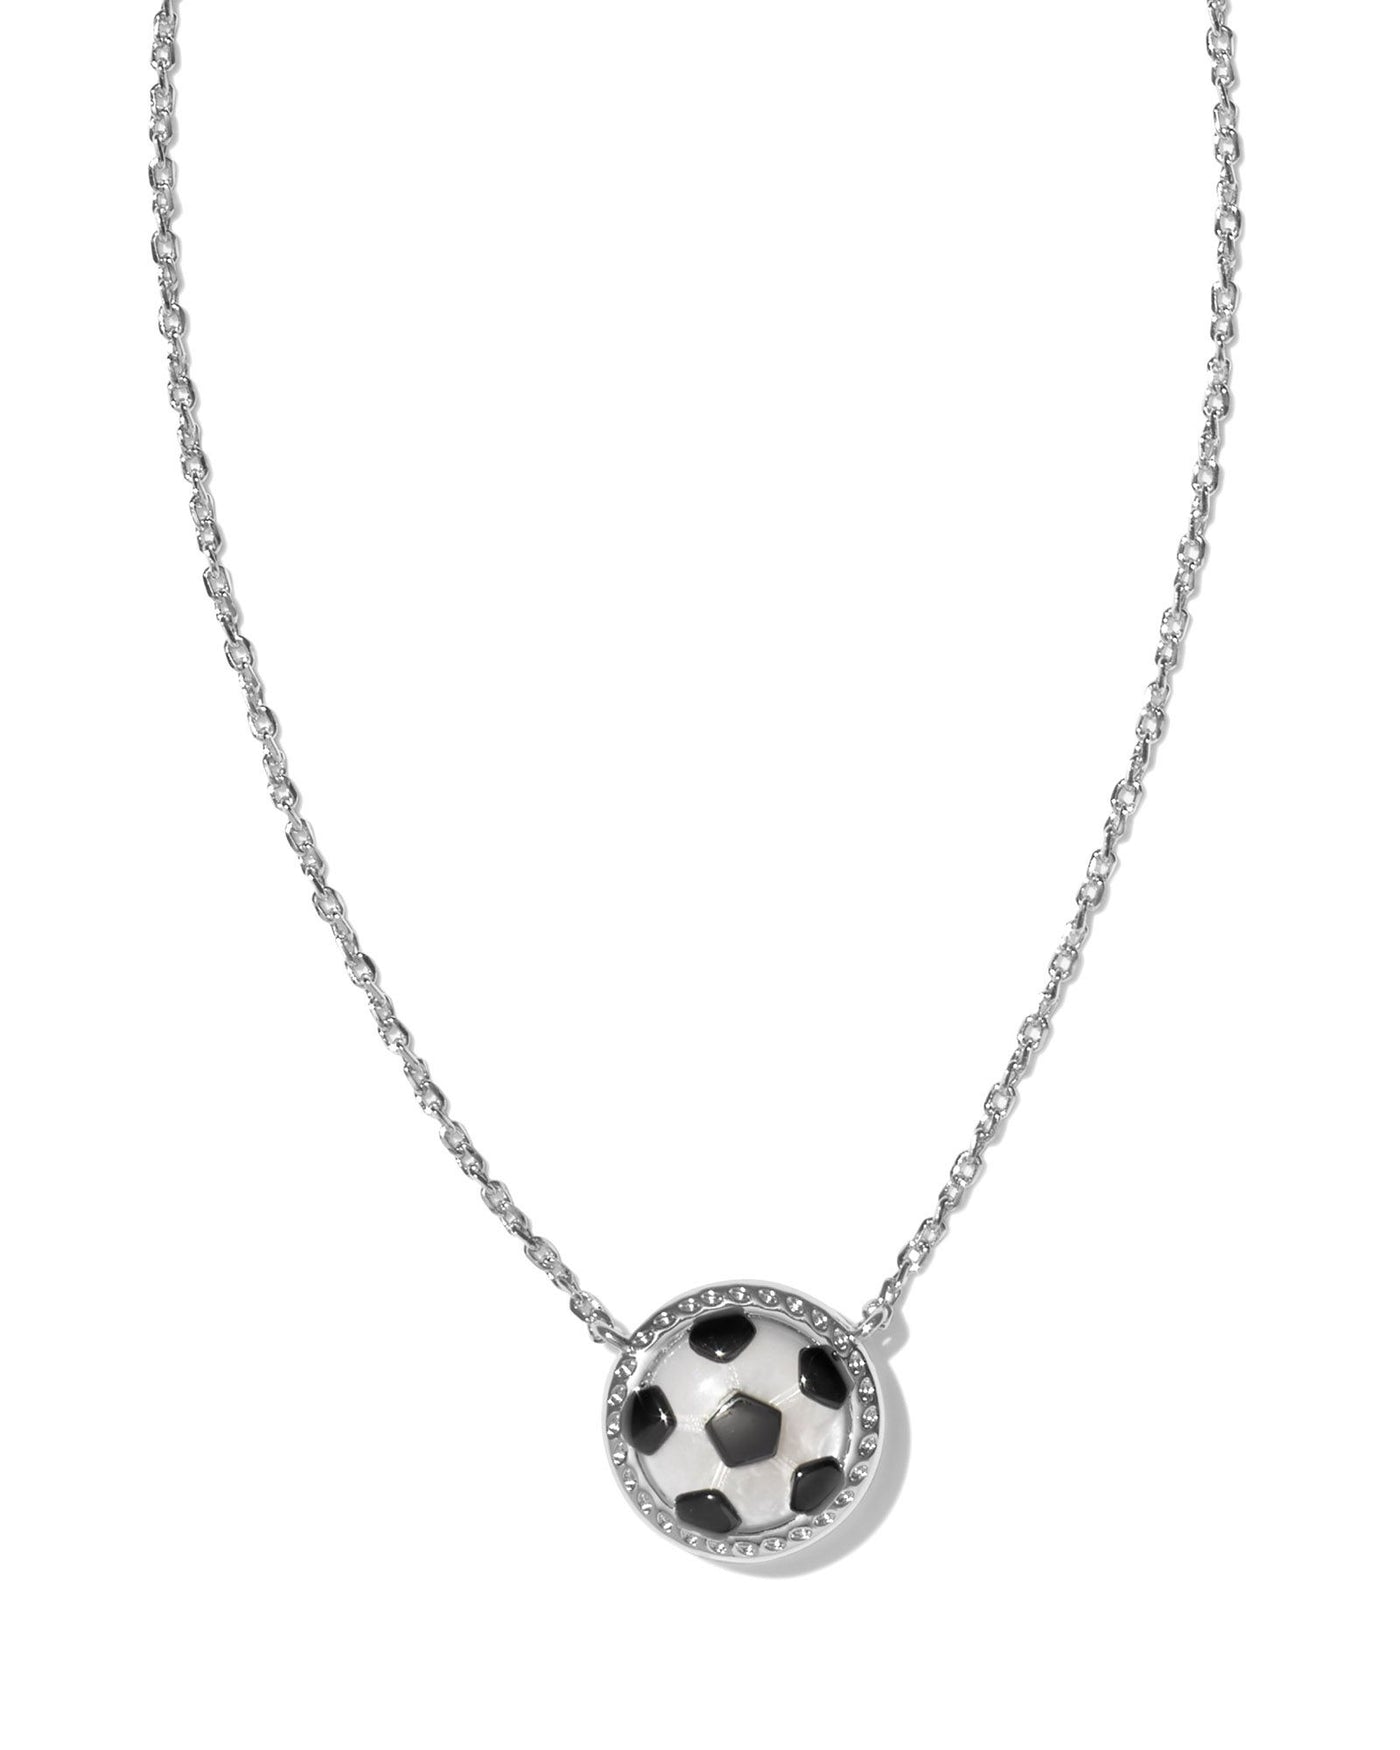 Silver View. Kendra Scott Soccer Short Pendant Necklace Ivory Mother Of Pearl-Necklaces-Kendra Scott-Market Street Nest, Fashionable Clothing, Shoes and Home Décor Located in Mabank, TX